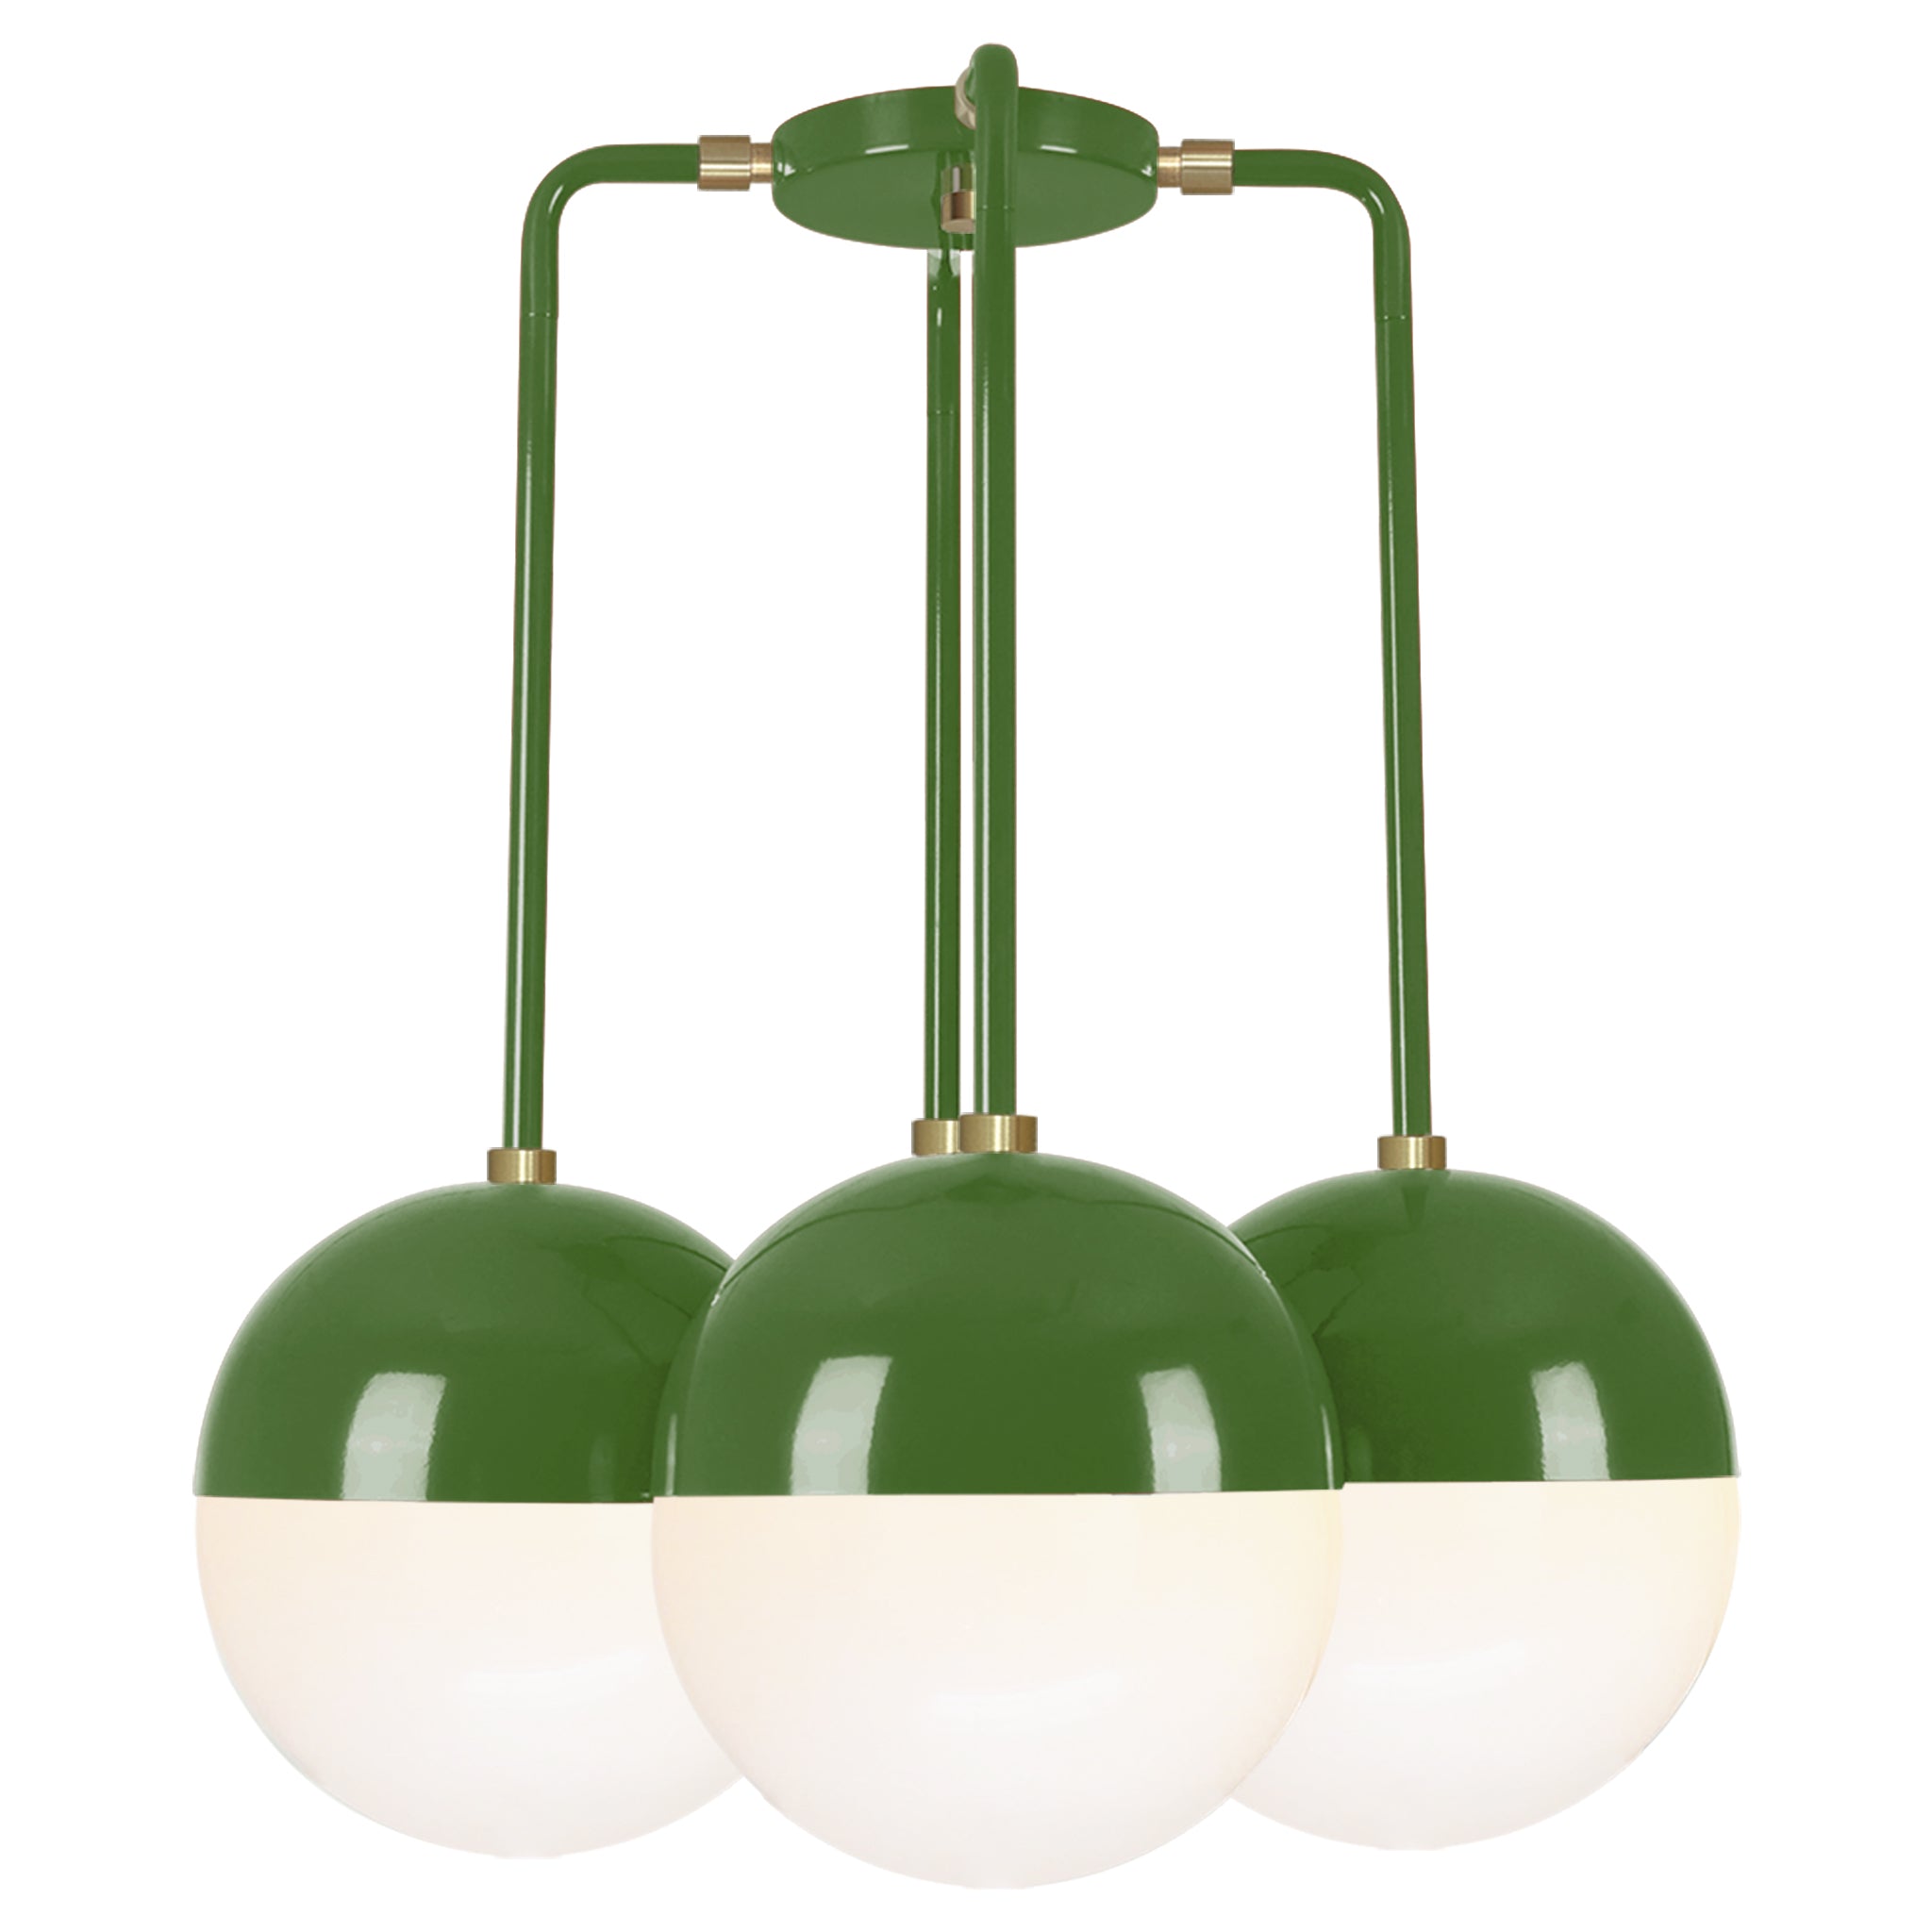 Brass and python green color Tetra chandelier Dutton Brown lighting